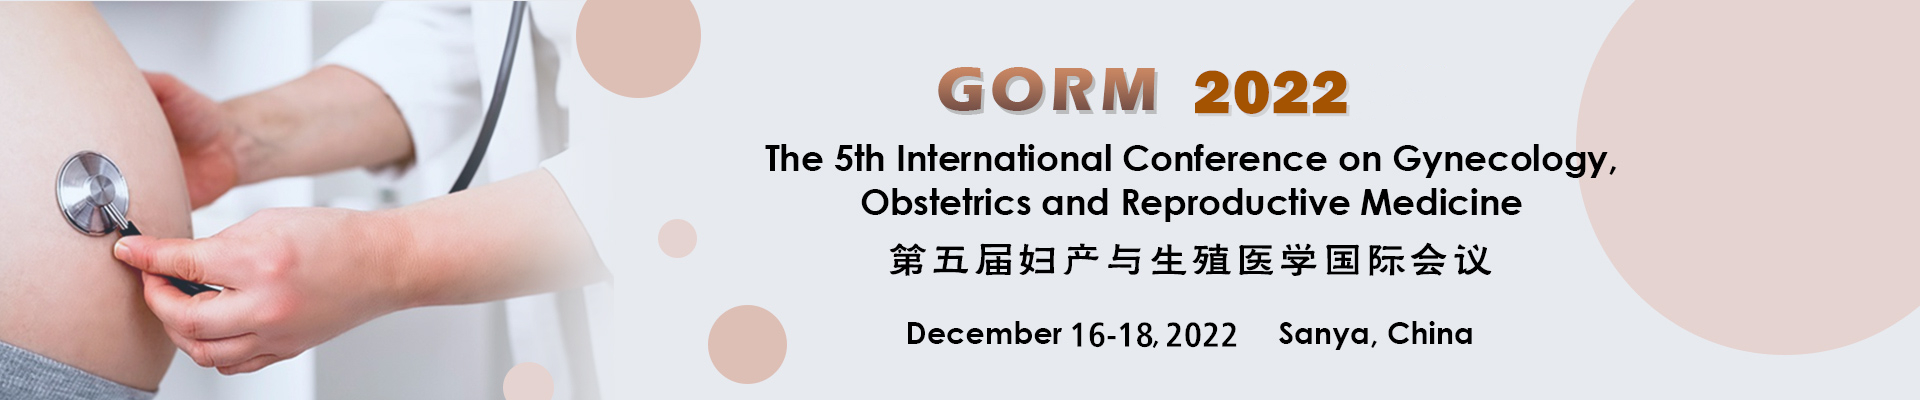 The 5th Int'l Conference on Gynecology, Obstetrics and Reproductive Medicine (GORM 2022), Sanya, Hainan, China